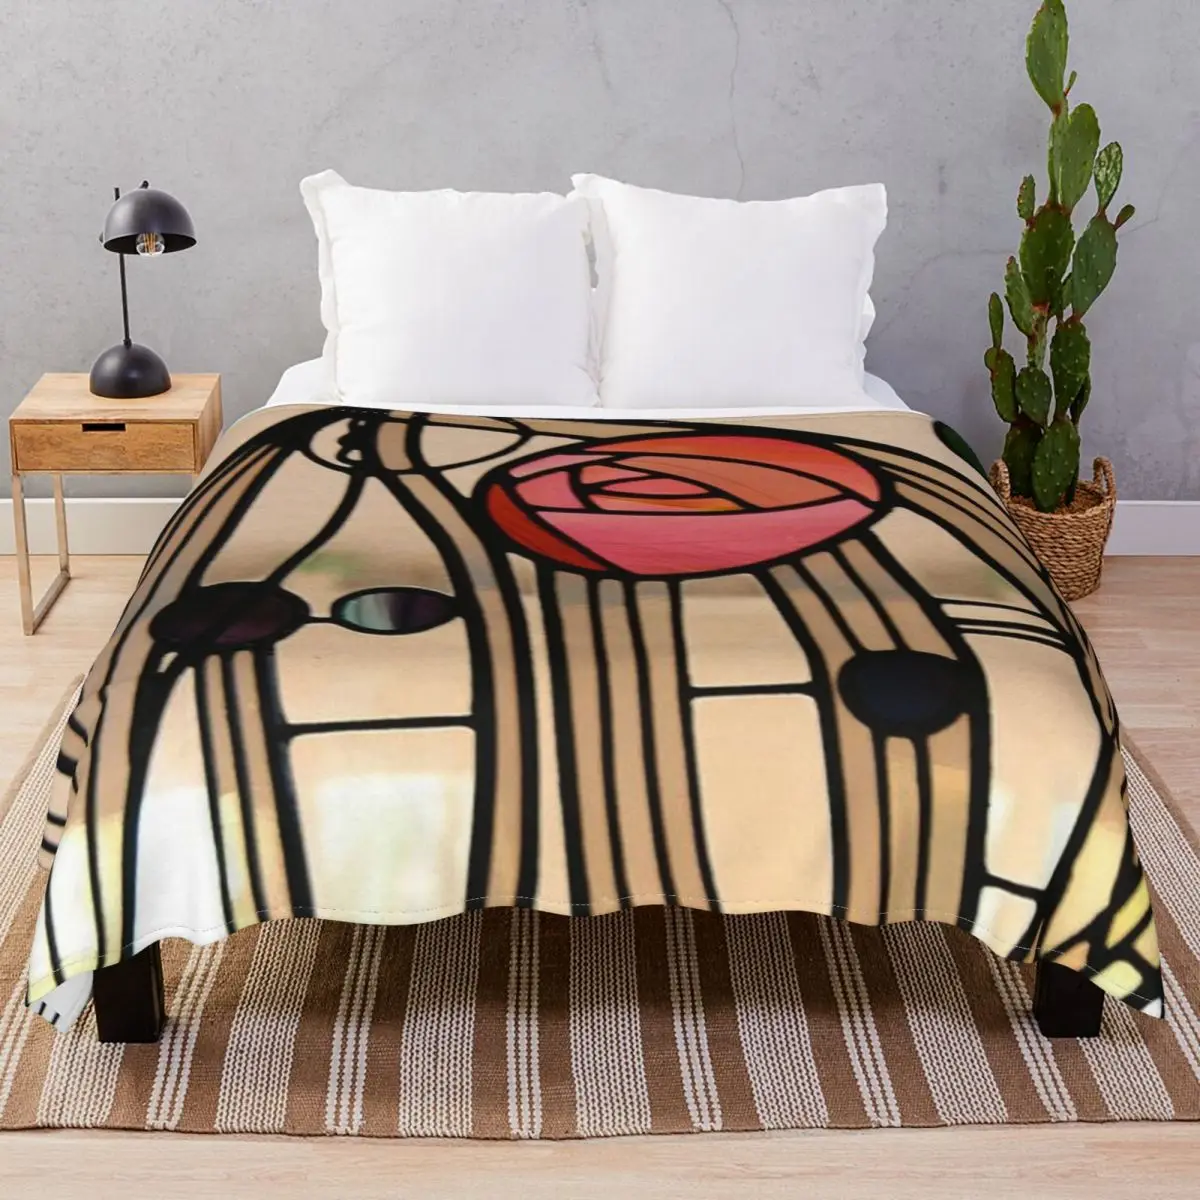 Window Charles Rennie Mackintosh Blankets Flannel Spring Autumn Multi-function Throw Blanket for Bed Sofa Camp Office